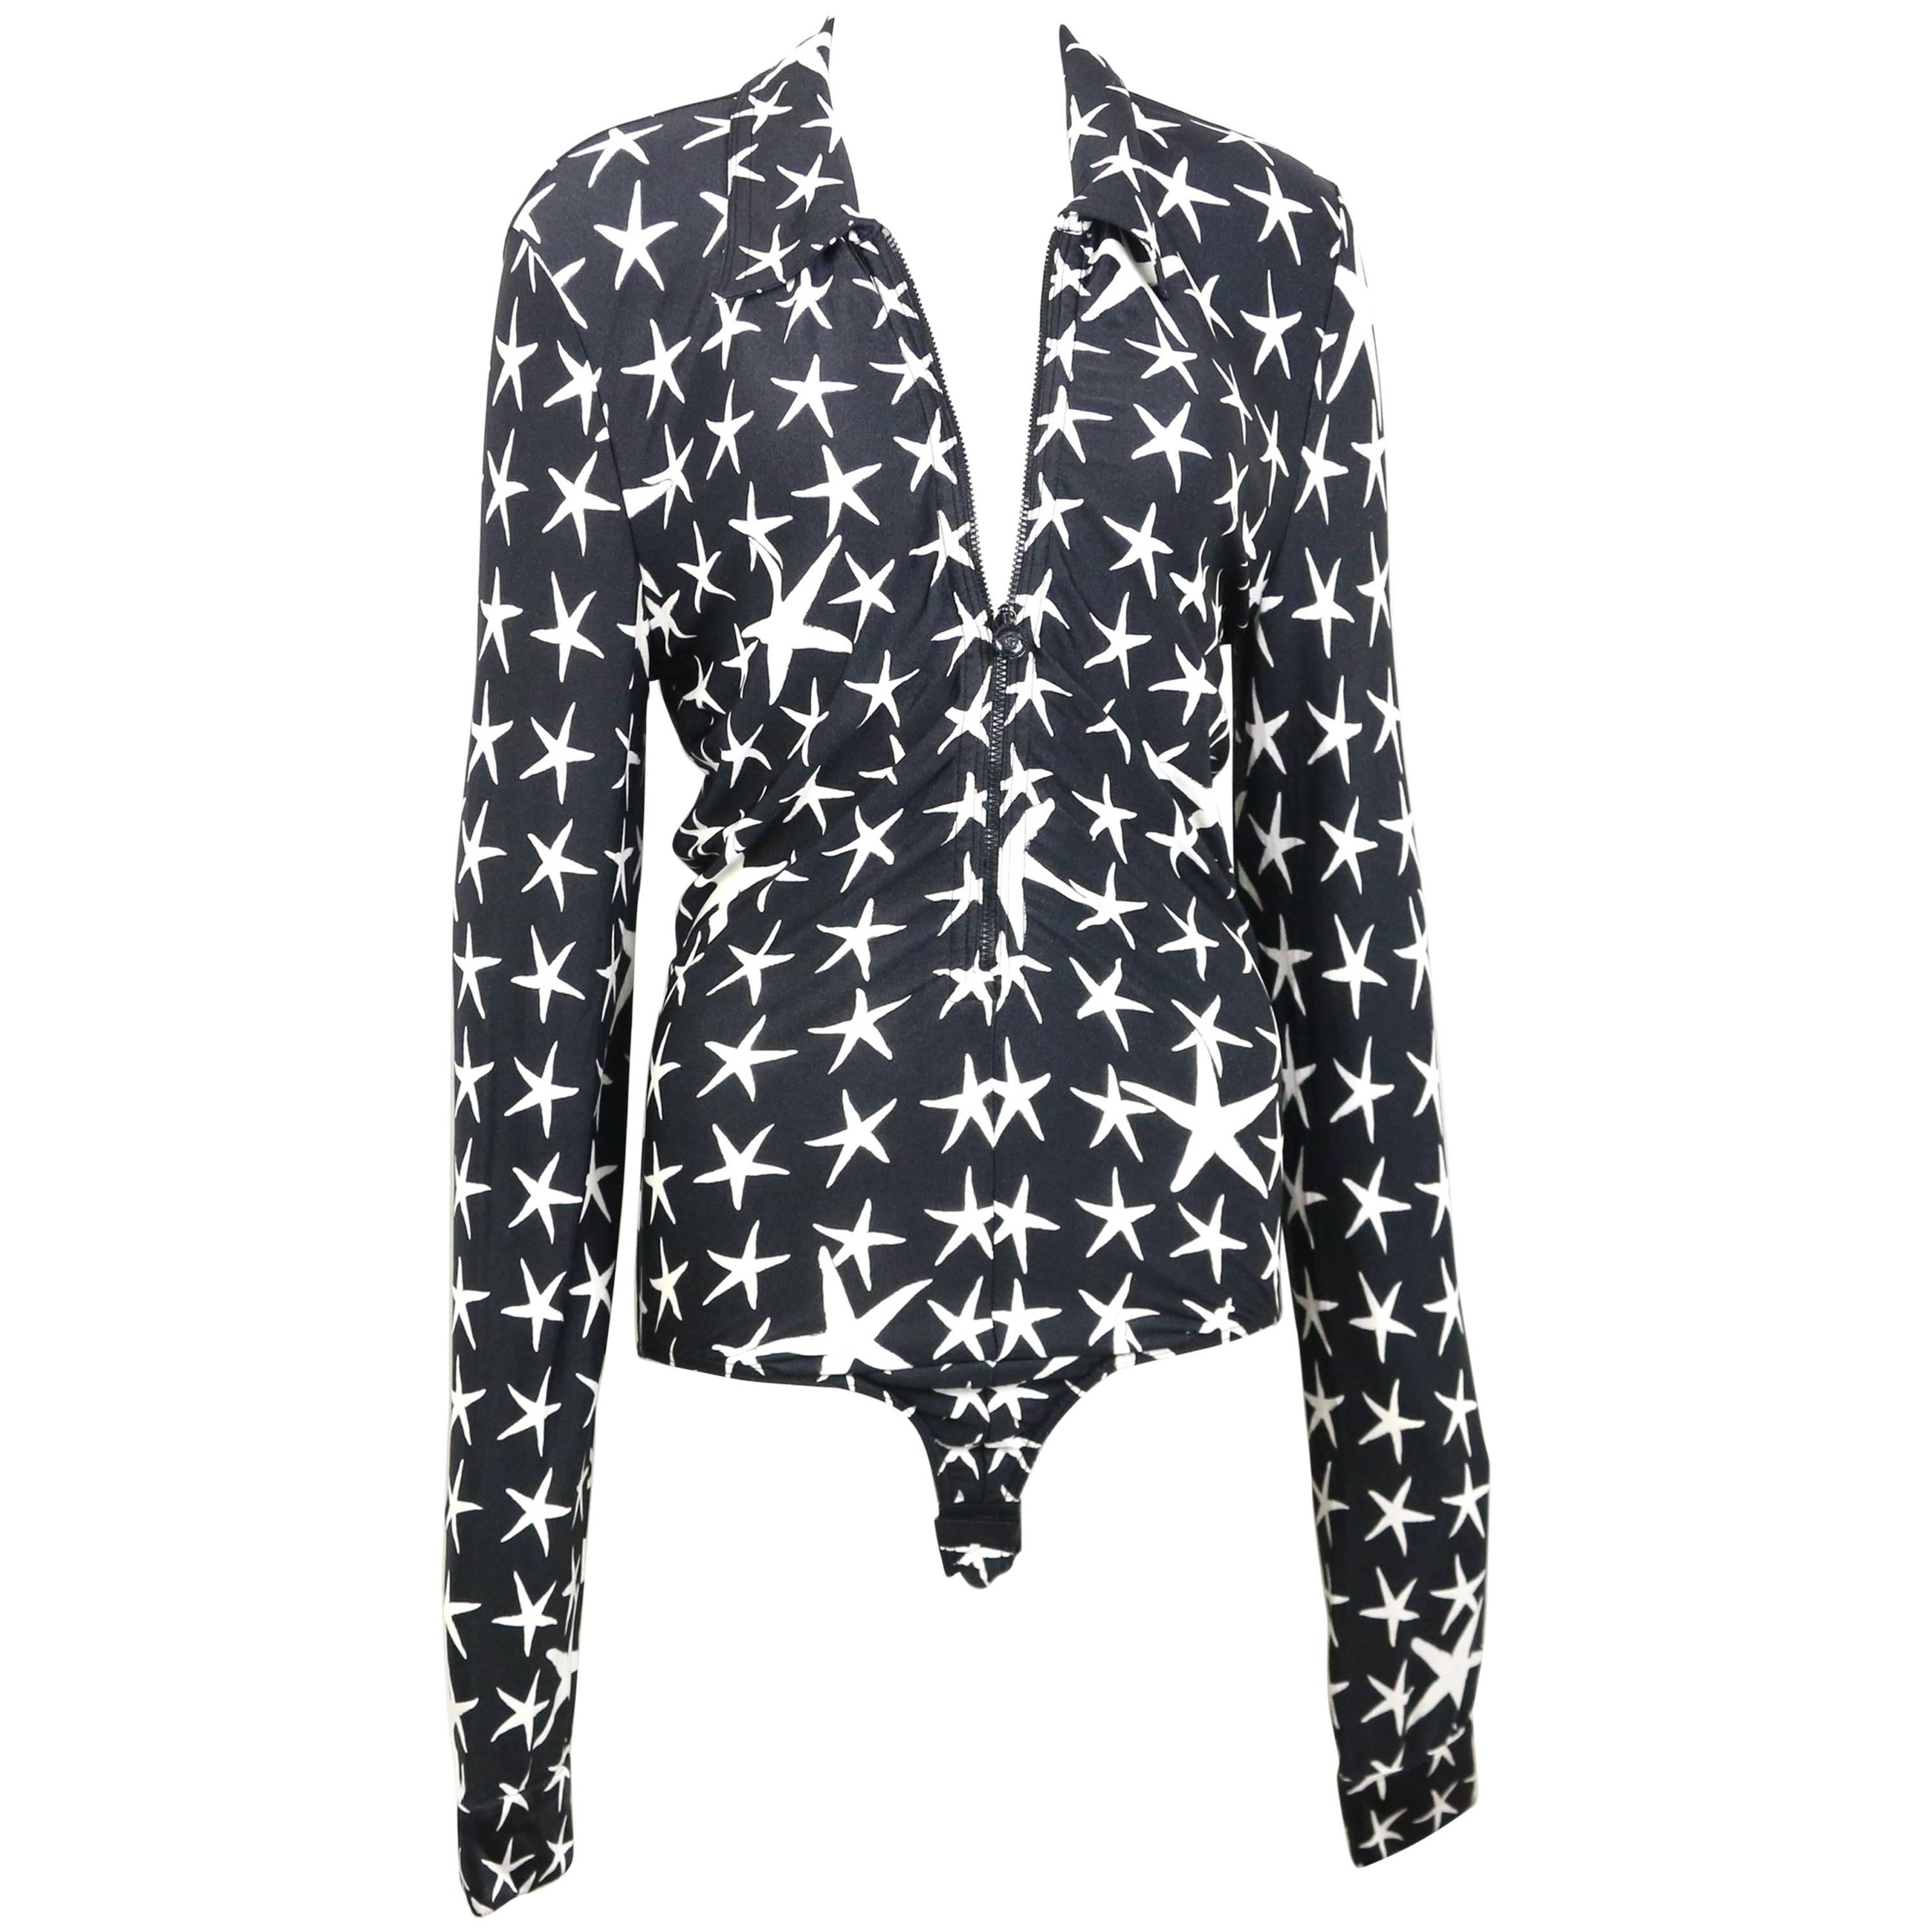 Gianni Versace Couture Black with White Stars Long Sleeves Bodysuit Top